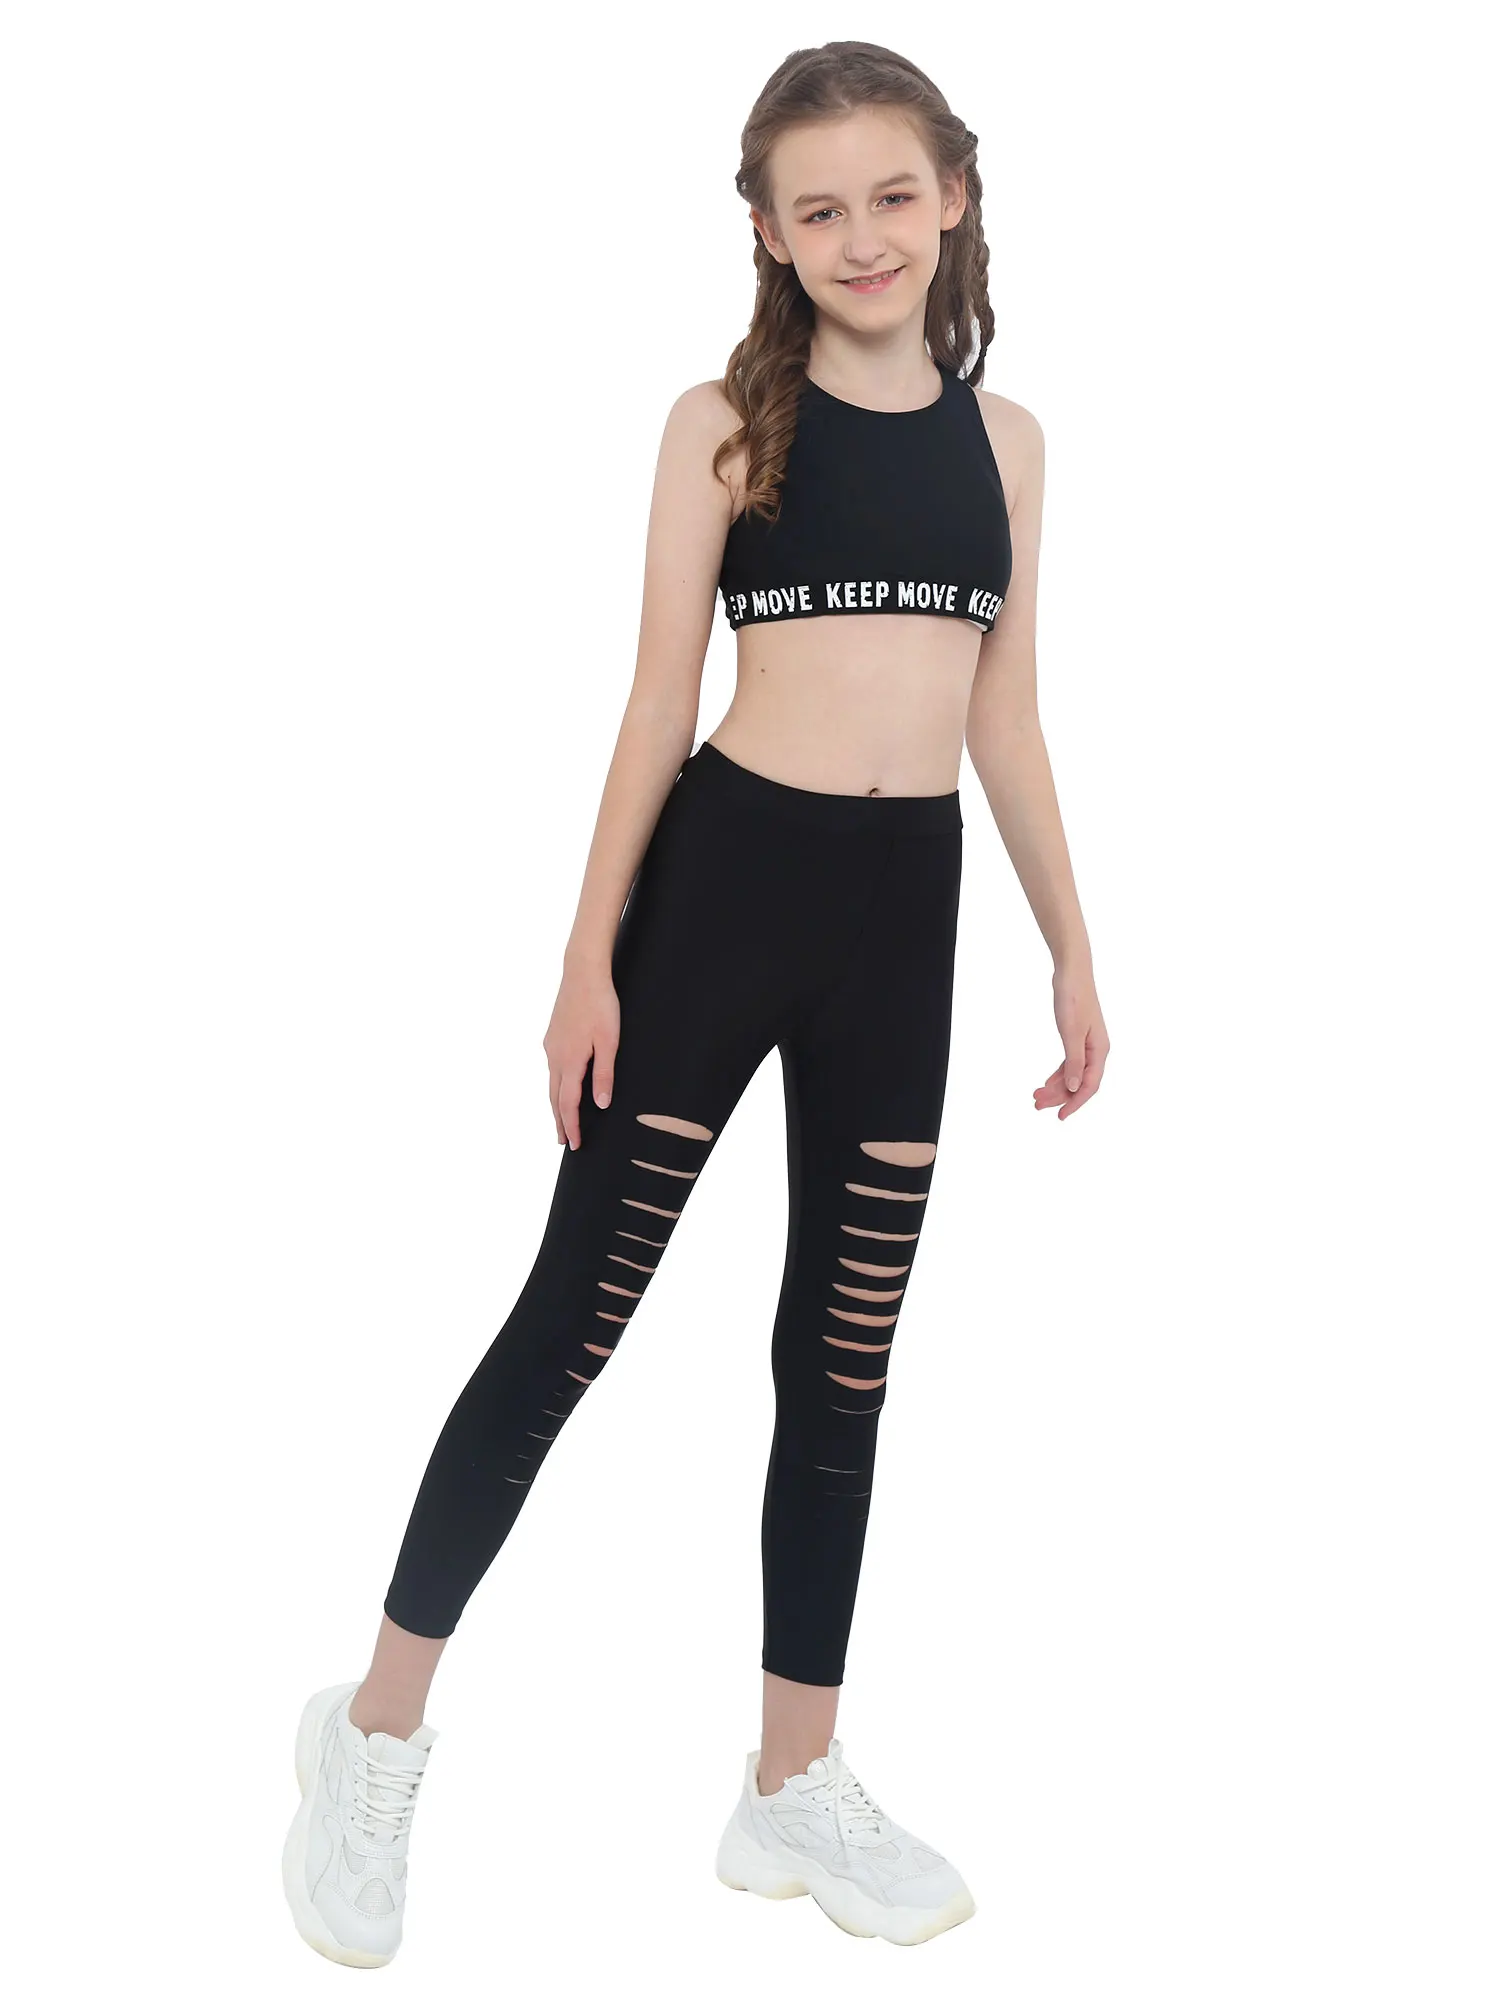 clothing sets black	 Yoga Sets Clothes Girl Sportswear Tracksuits for Children fitness suit Kids Sport Outfit Gym Crop Top with Leggings Running Sets baby boy clothing sets cheap	